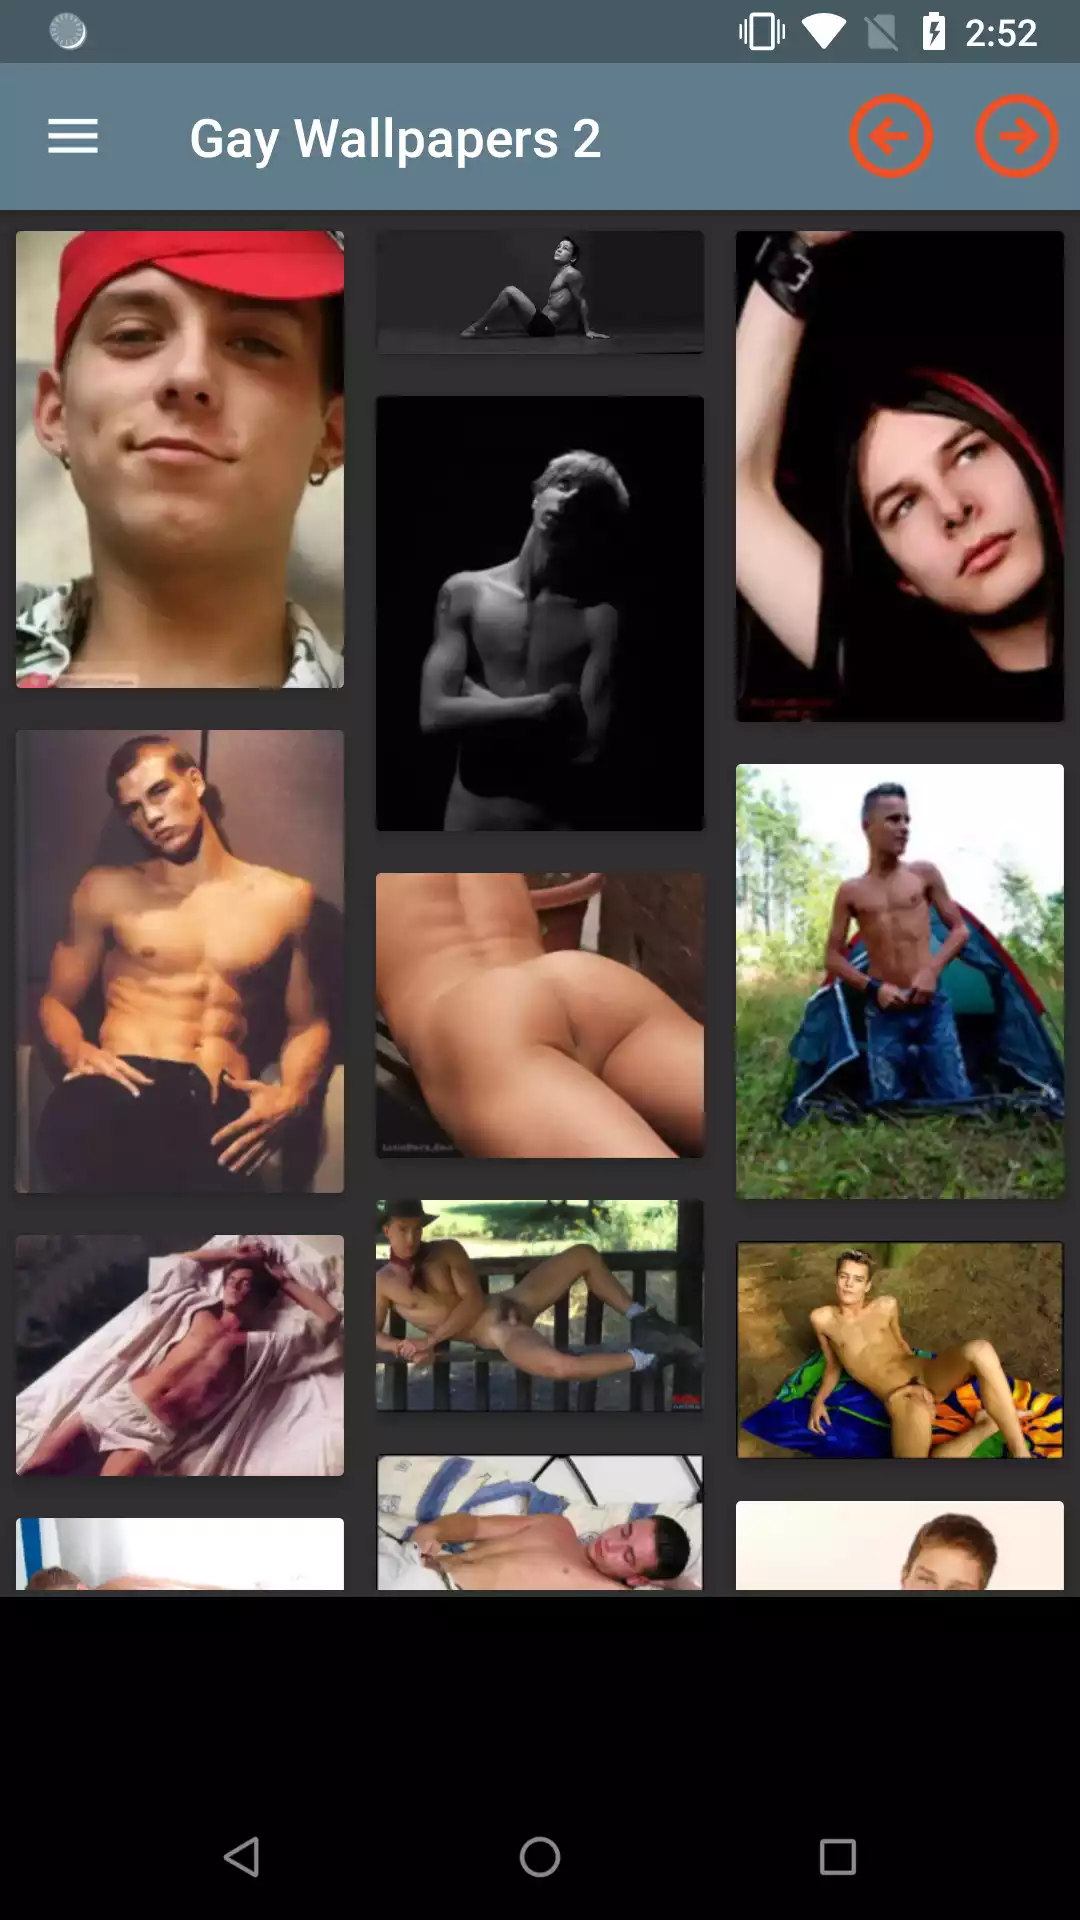 Gay Wallpapers porn,download,sexy,app,photos,photo,picture,best,image,apk,adult,hentai,pornstars,manga,hentie,apps,men,for,downloading,backgrounds,wallpapers,pic,pics,galleries,gay